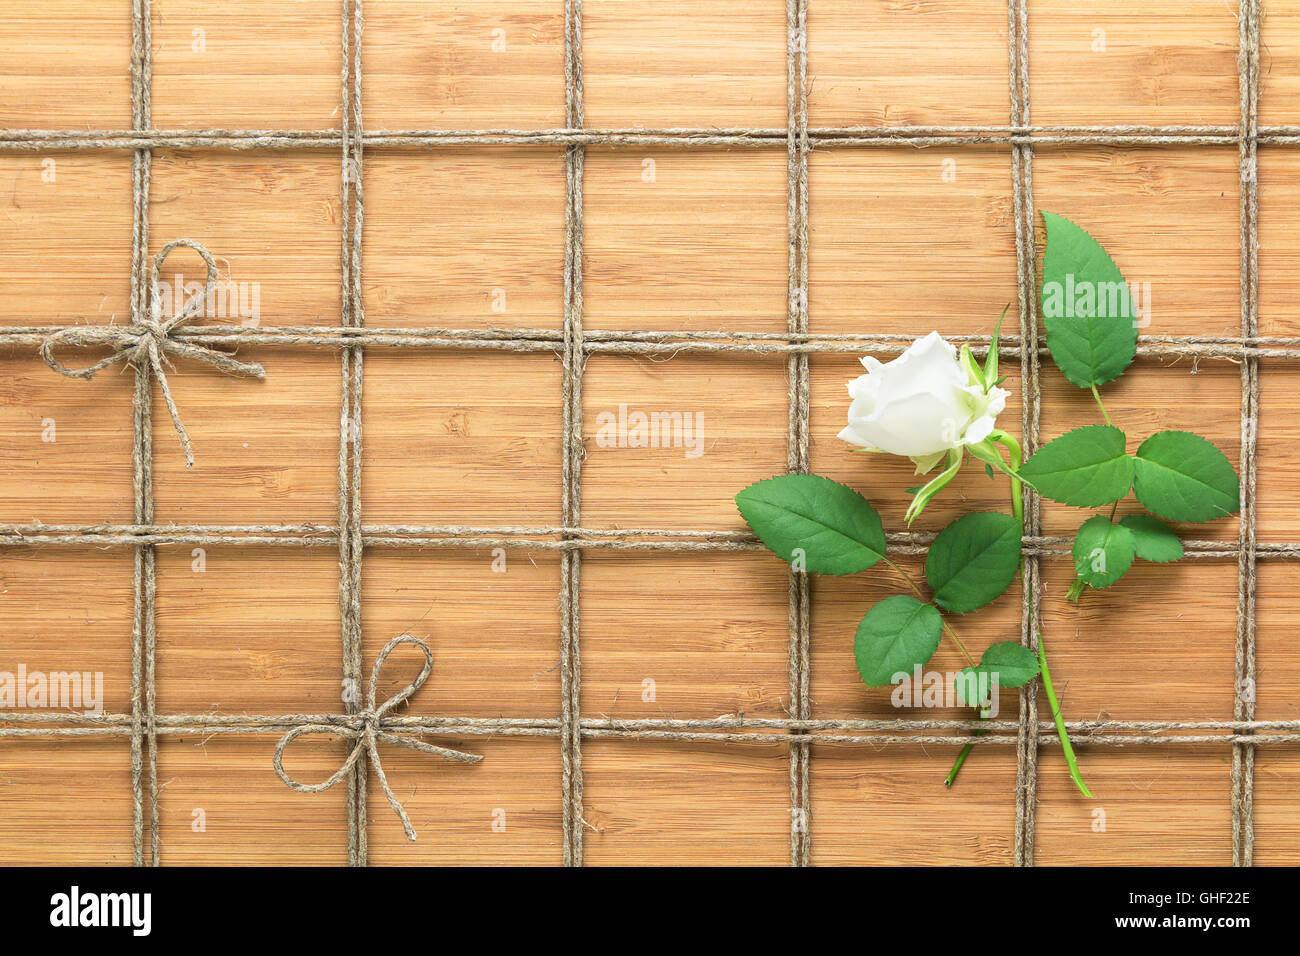 Square lined rope pattern on a wooden background and white rose with leaves interwoven between it. Texture for nature themes. Stock Photo